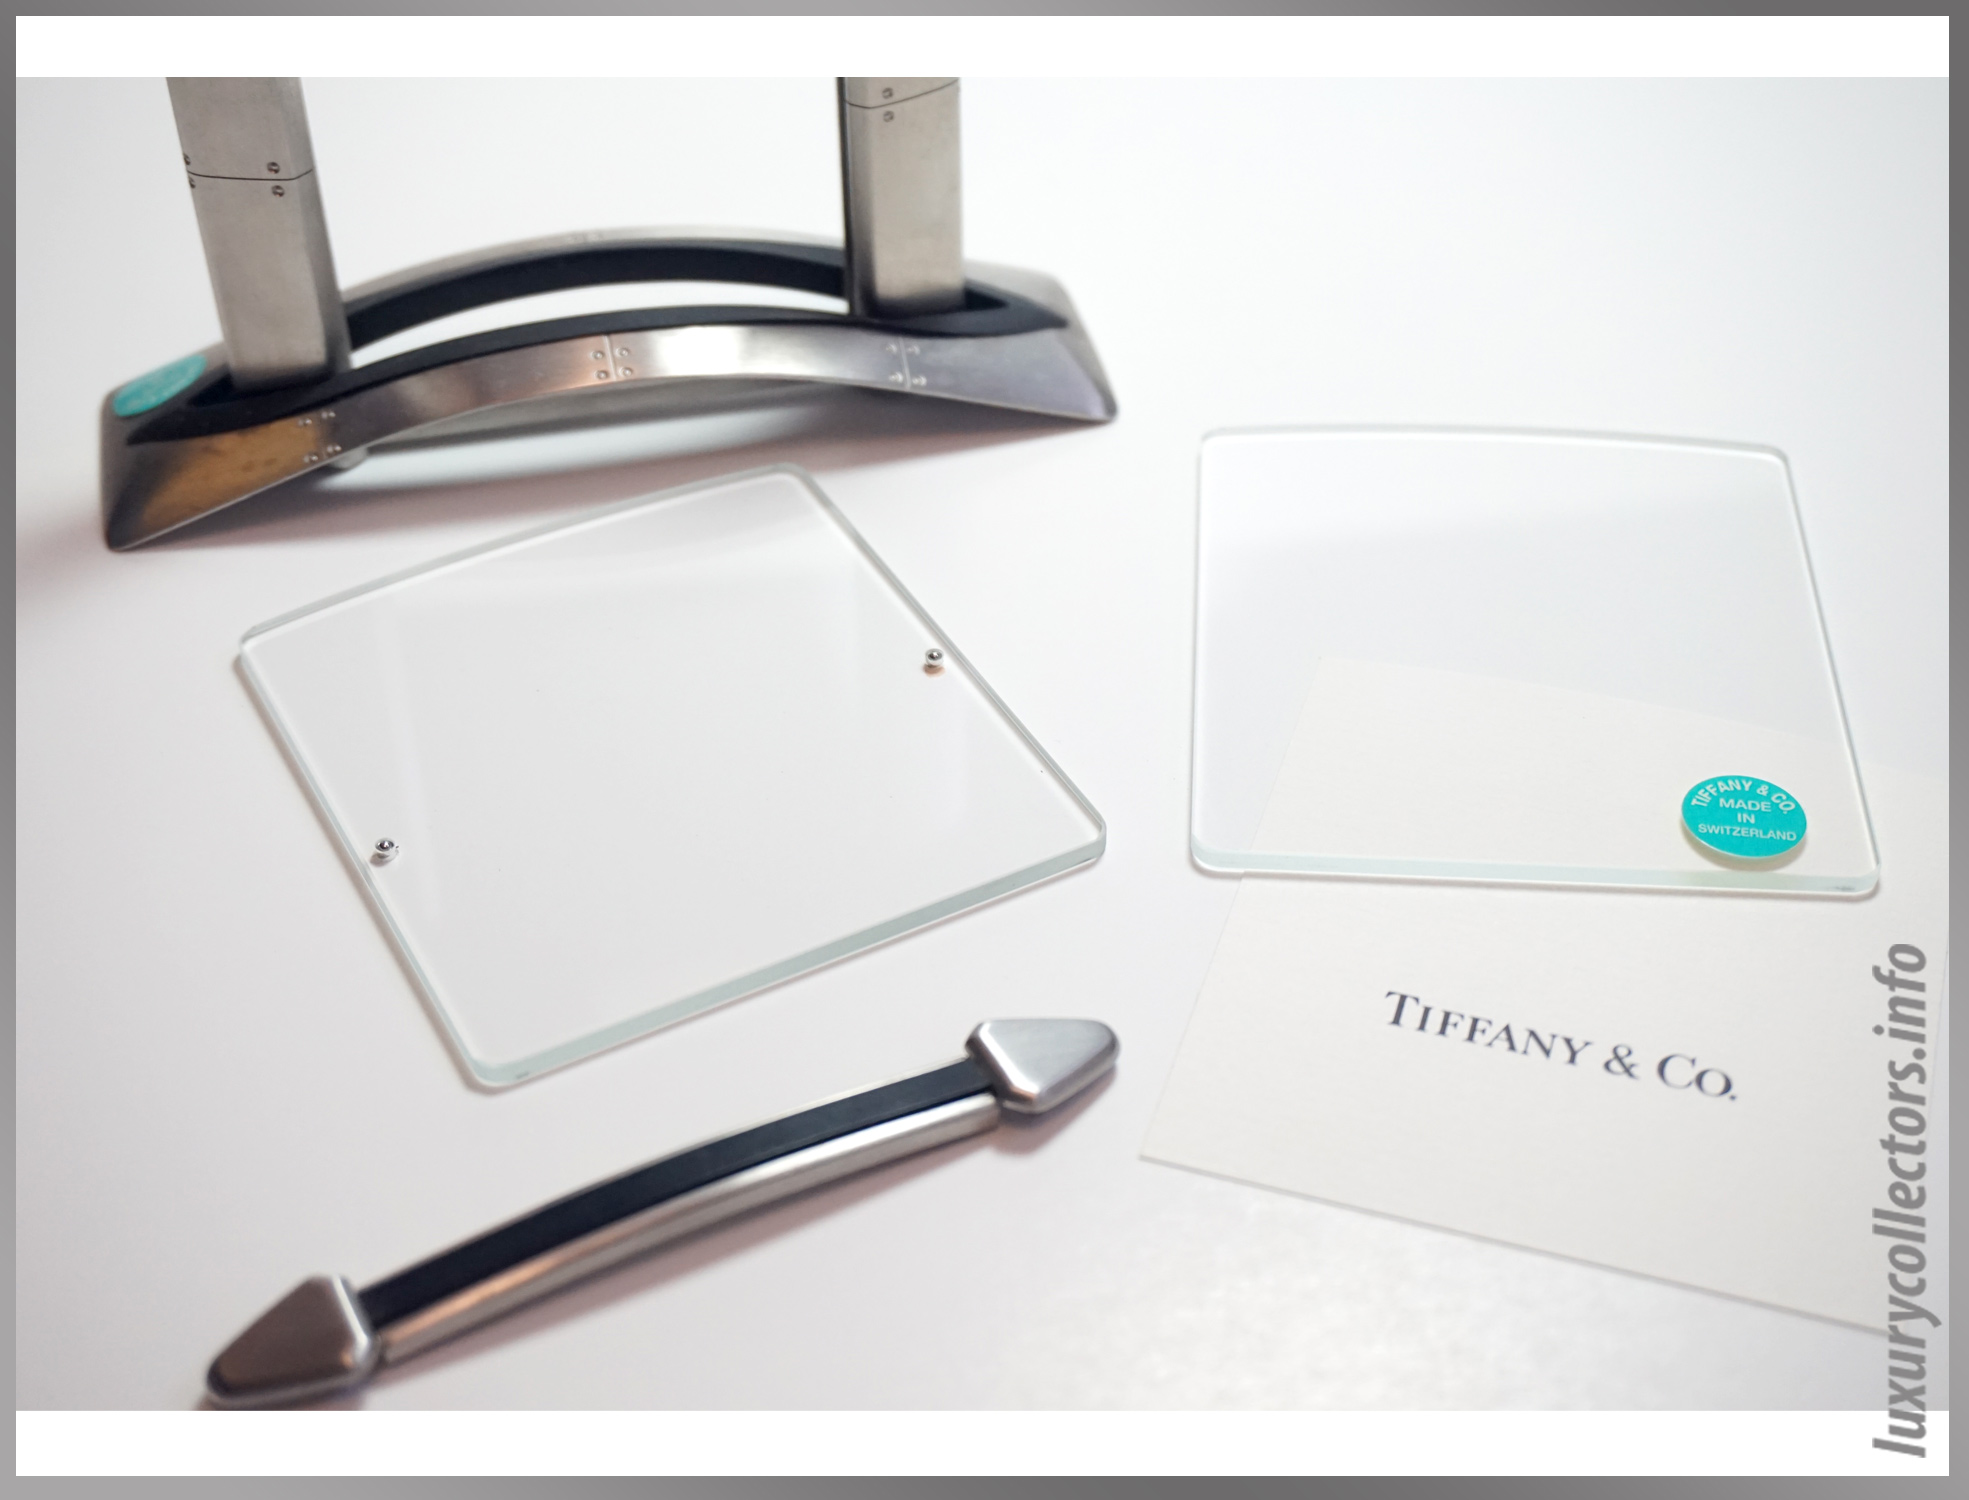 Tiffany & and Co. Streamerica Stainless Steel Airframe Picture Photo Frame Medium Swiss Made in Switzerland Detailed logo glass panels